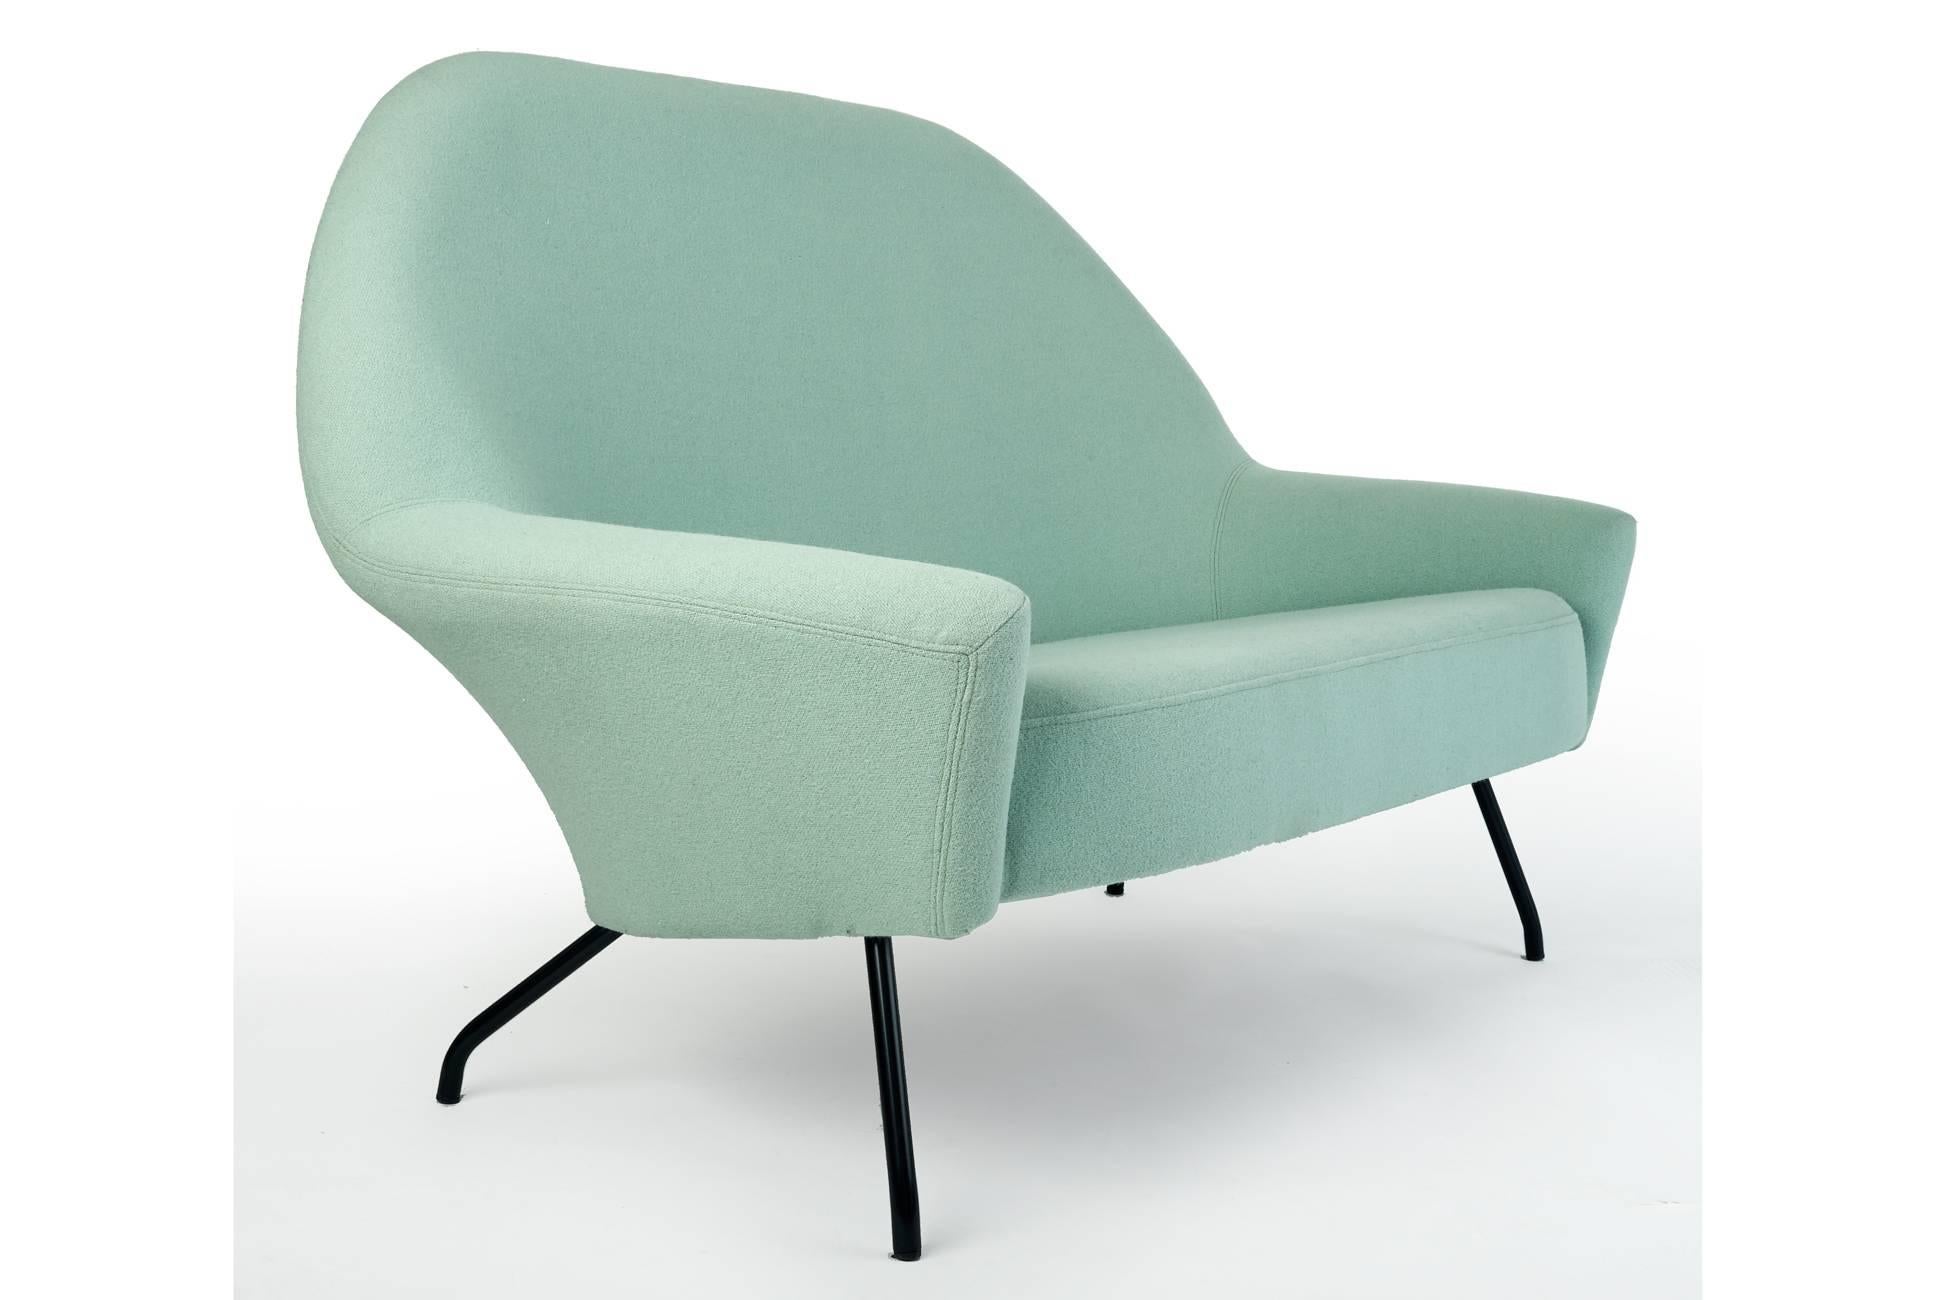 Joseph-André Motte (1925-2013)

Important, sculptural model 770 couch by Joseph-André Motte for Steiner. With a sinuous high back and dramatic winged armrests upholstered in linden green wool, supported by playfully slanted and curved black enameled